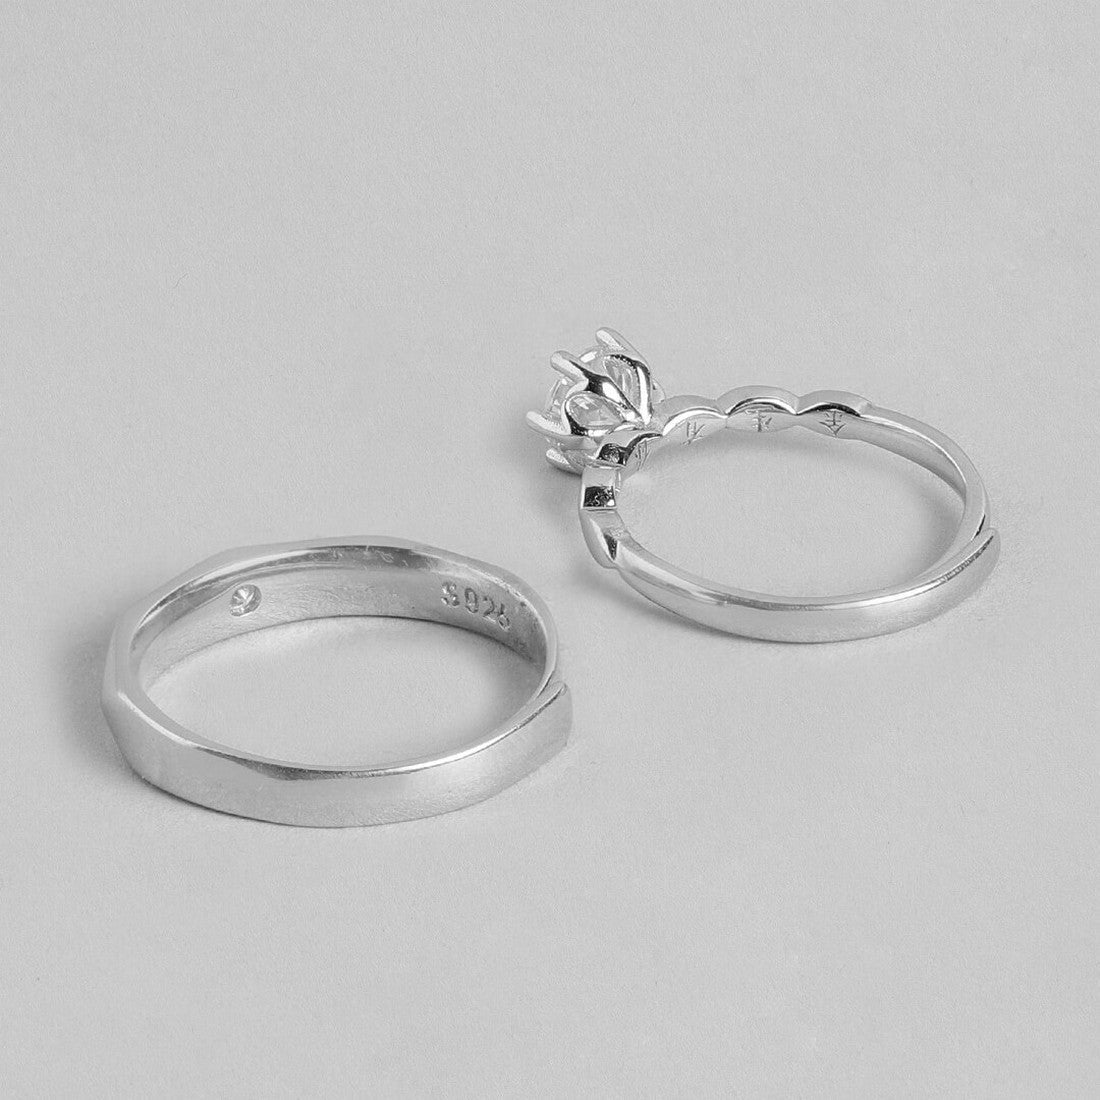 Eternally Bound Couple Rings 925 Silver Rings - Valentines Edition With Gift Box